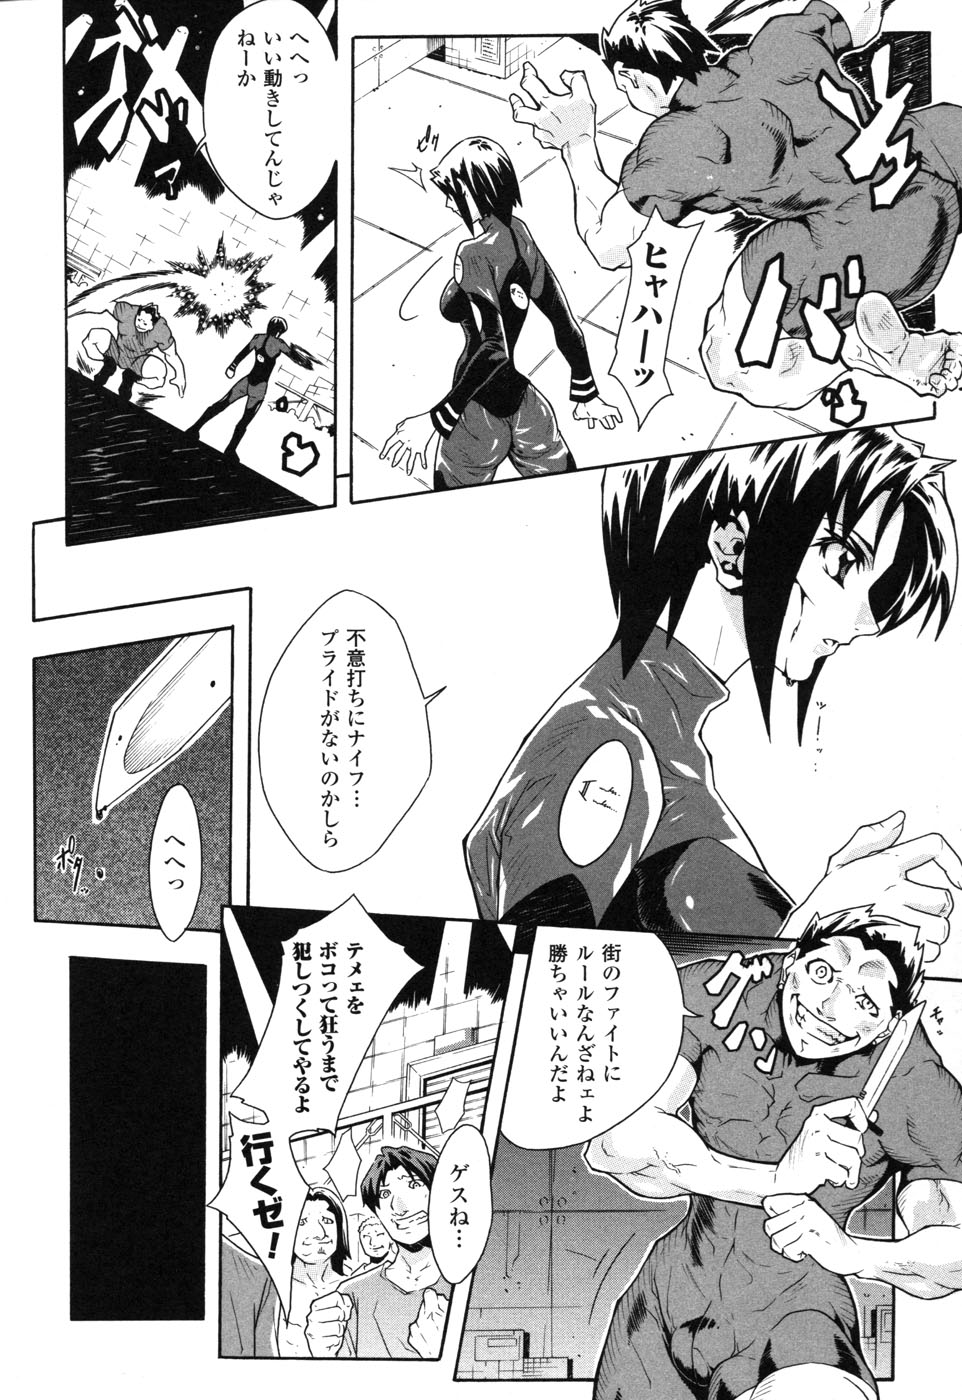 Rider Suit Heroine Anthology Comics 2 page 10 full